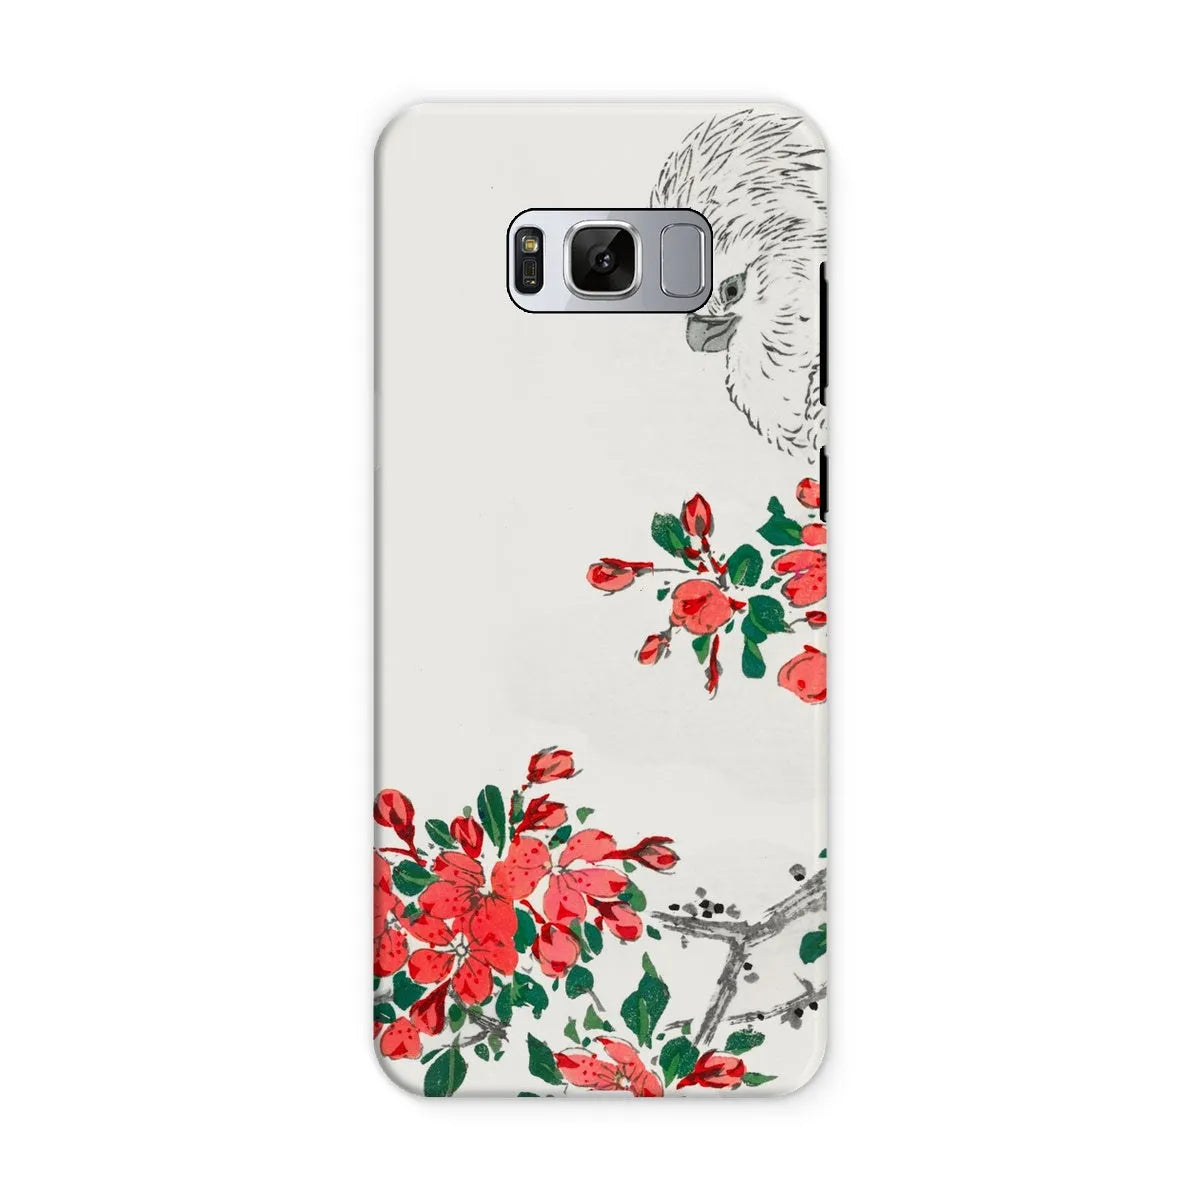 Parrot And Pyrus - Japanese Bird Phone Case - Numata Kashu - Samsung Galaxy S8 / Matte - Mobile Phone Cases - Aesthetic